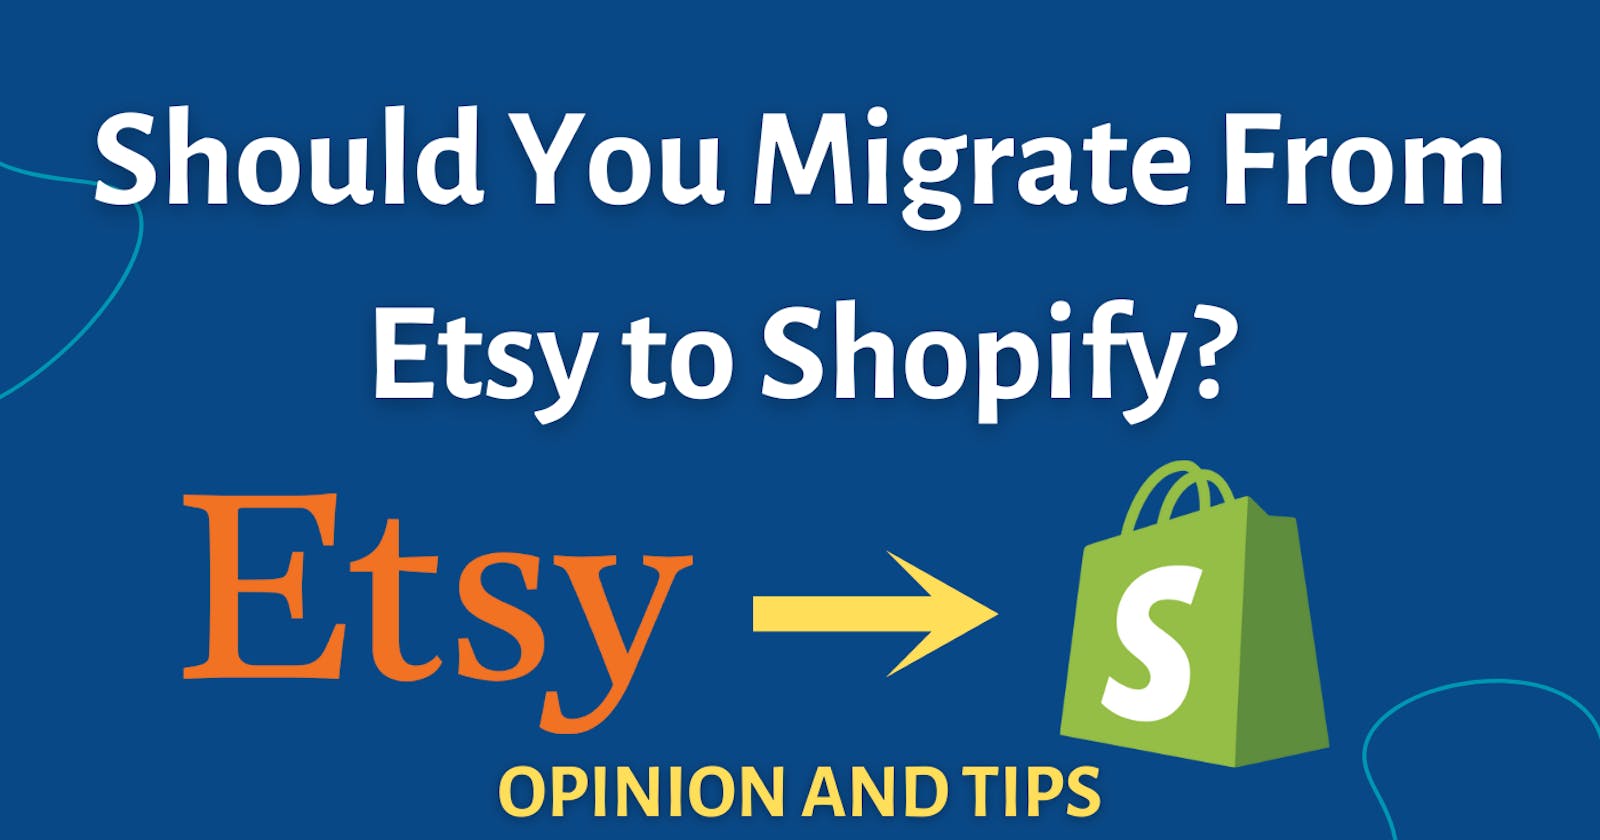 Should You Migrate From Etsy to Shopify?